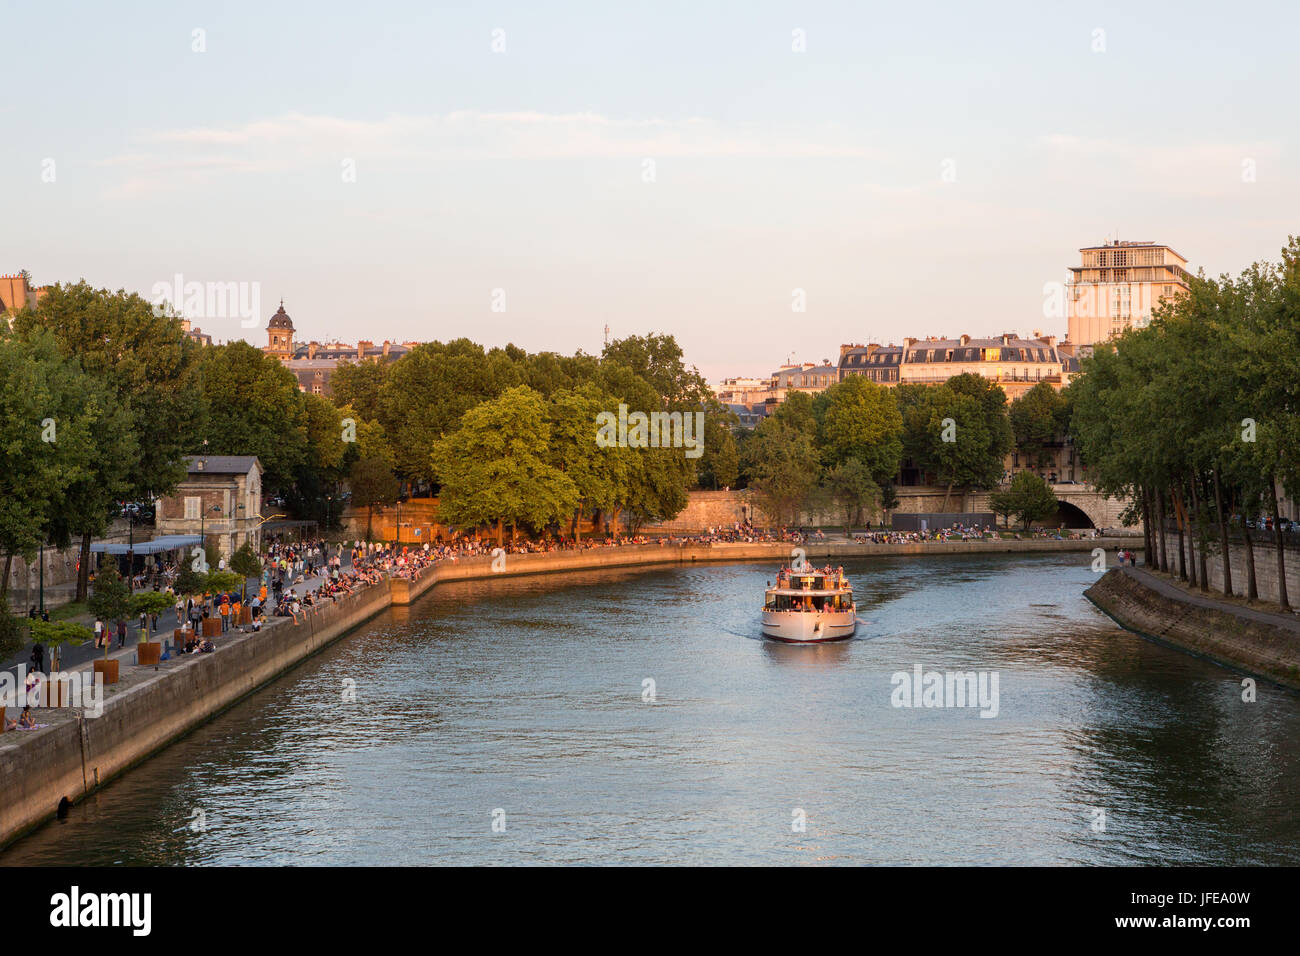 A passenger boat with tourists cruises along the Seine River while Parisians sit along the river banks. Stock Photo